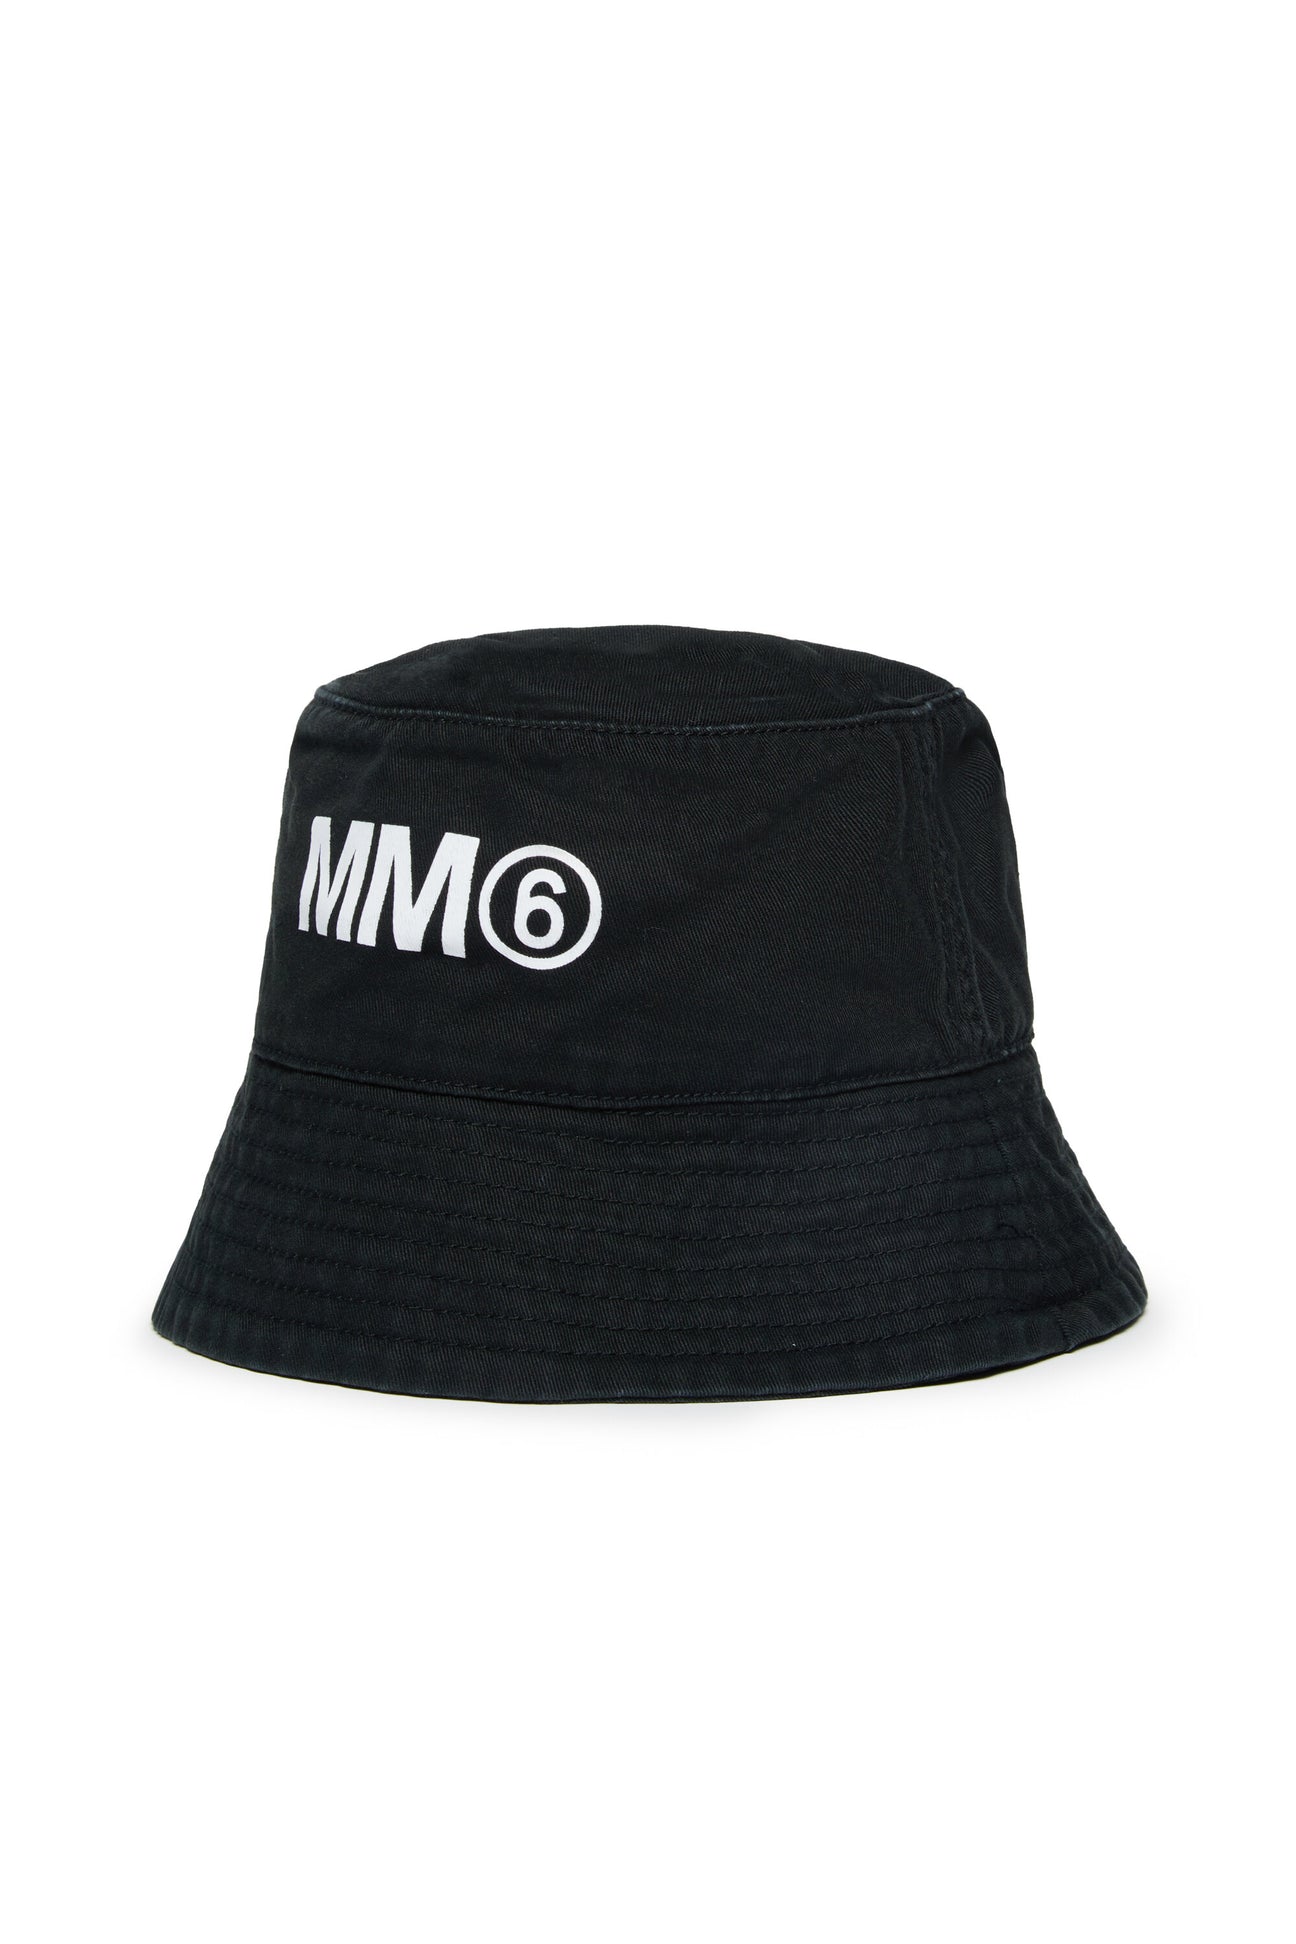 Fisherman hat with MM6 logo Fisherman hat with MM6 logo